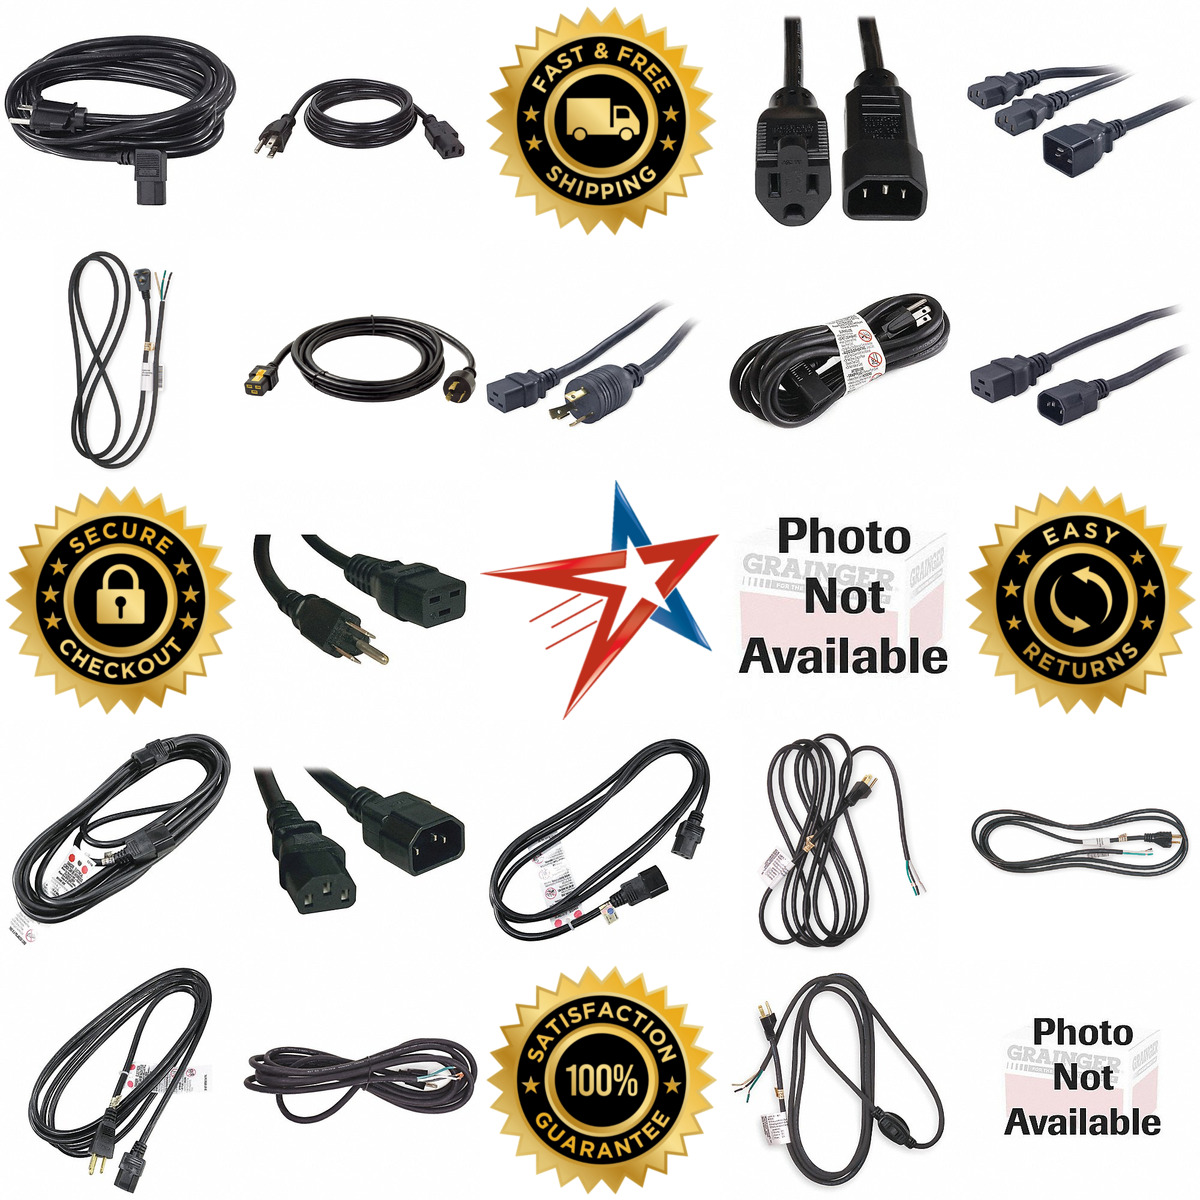 A selection of Power Supply Cords products on GoVets